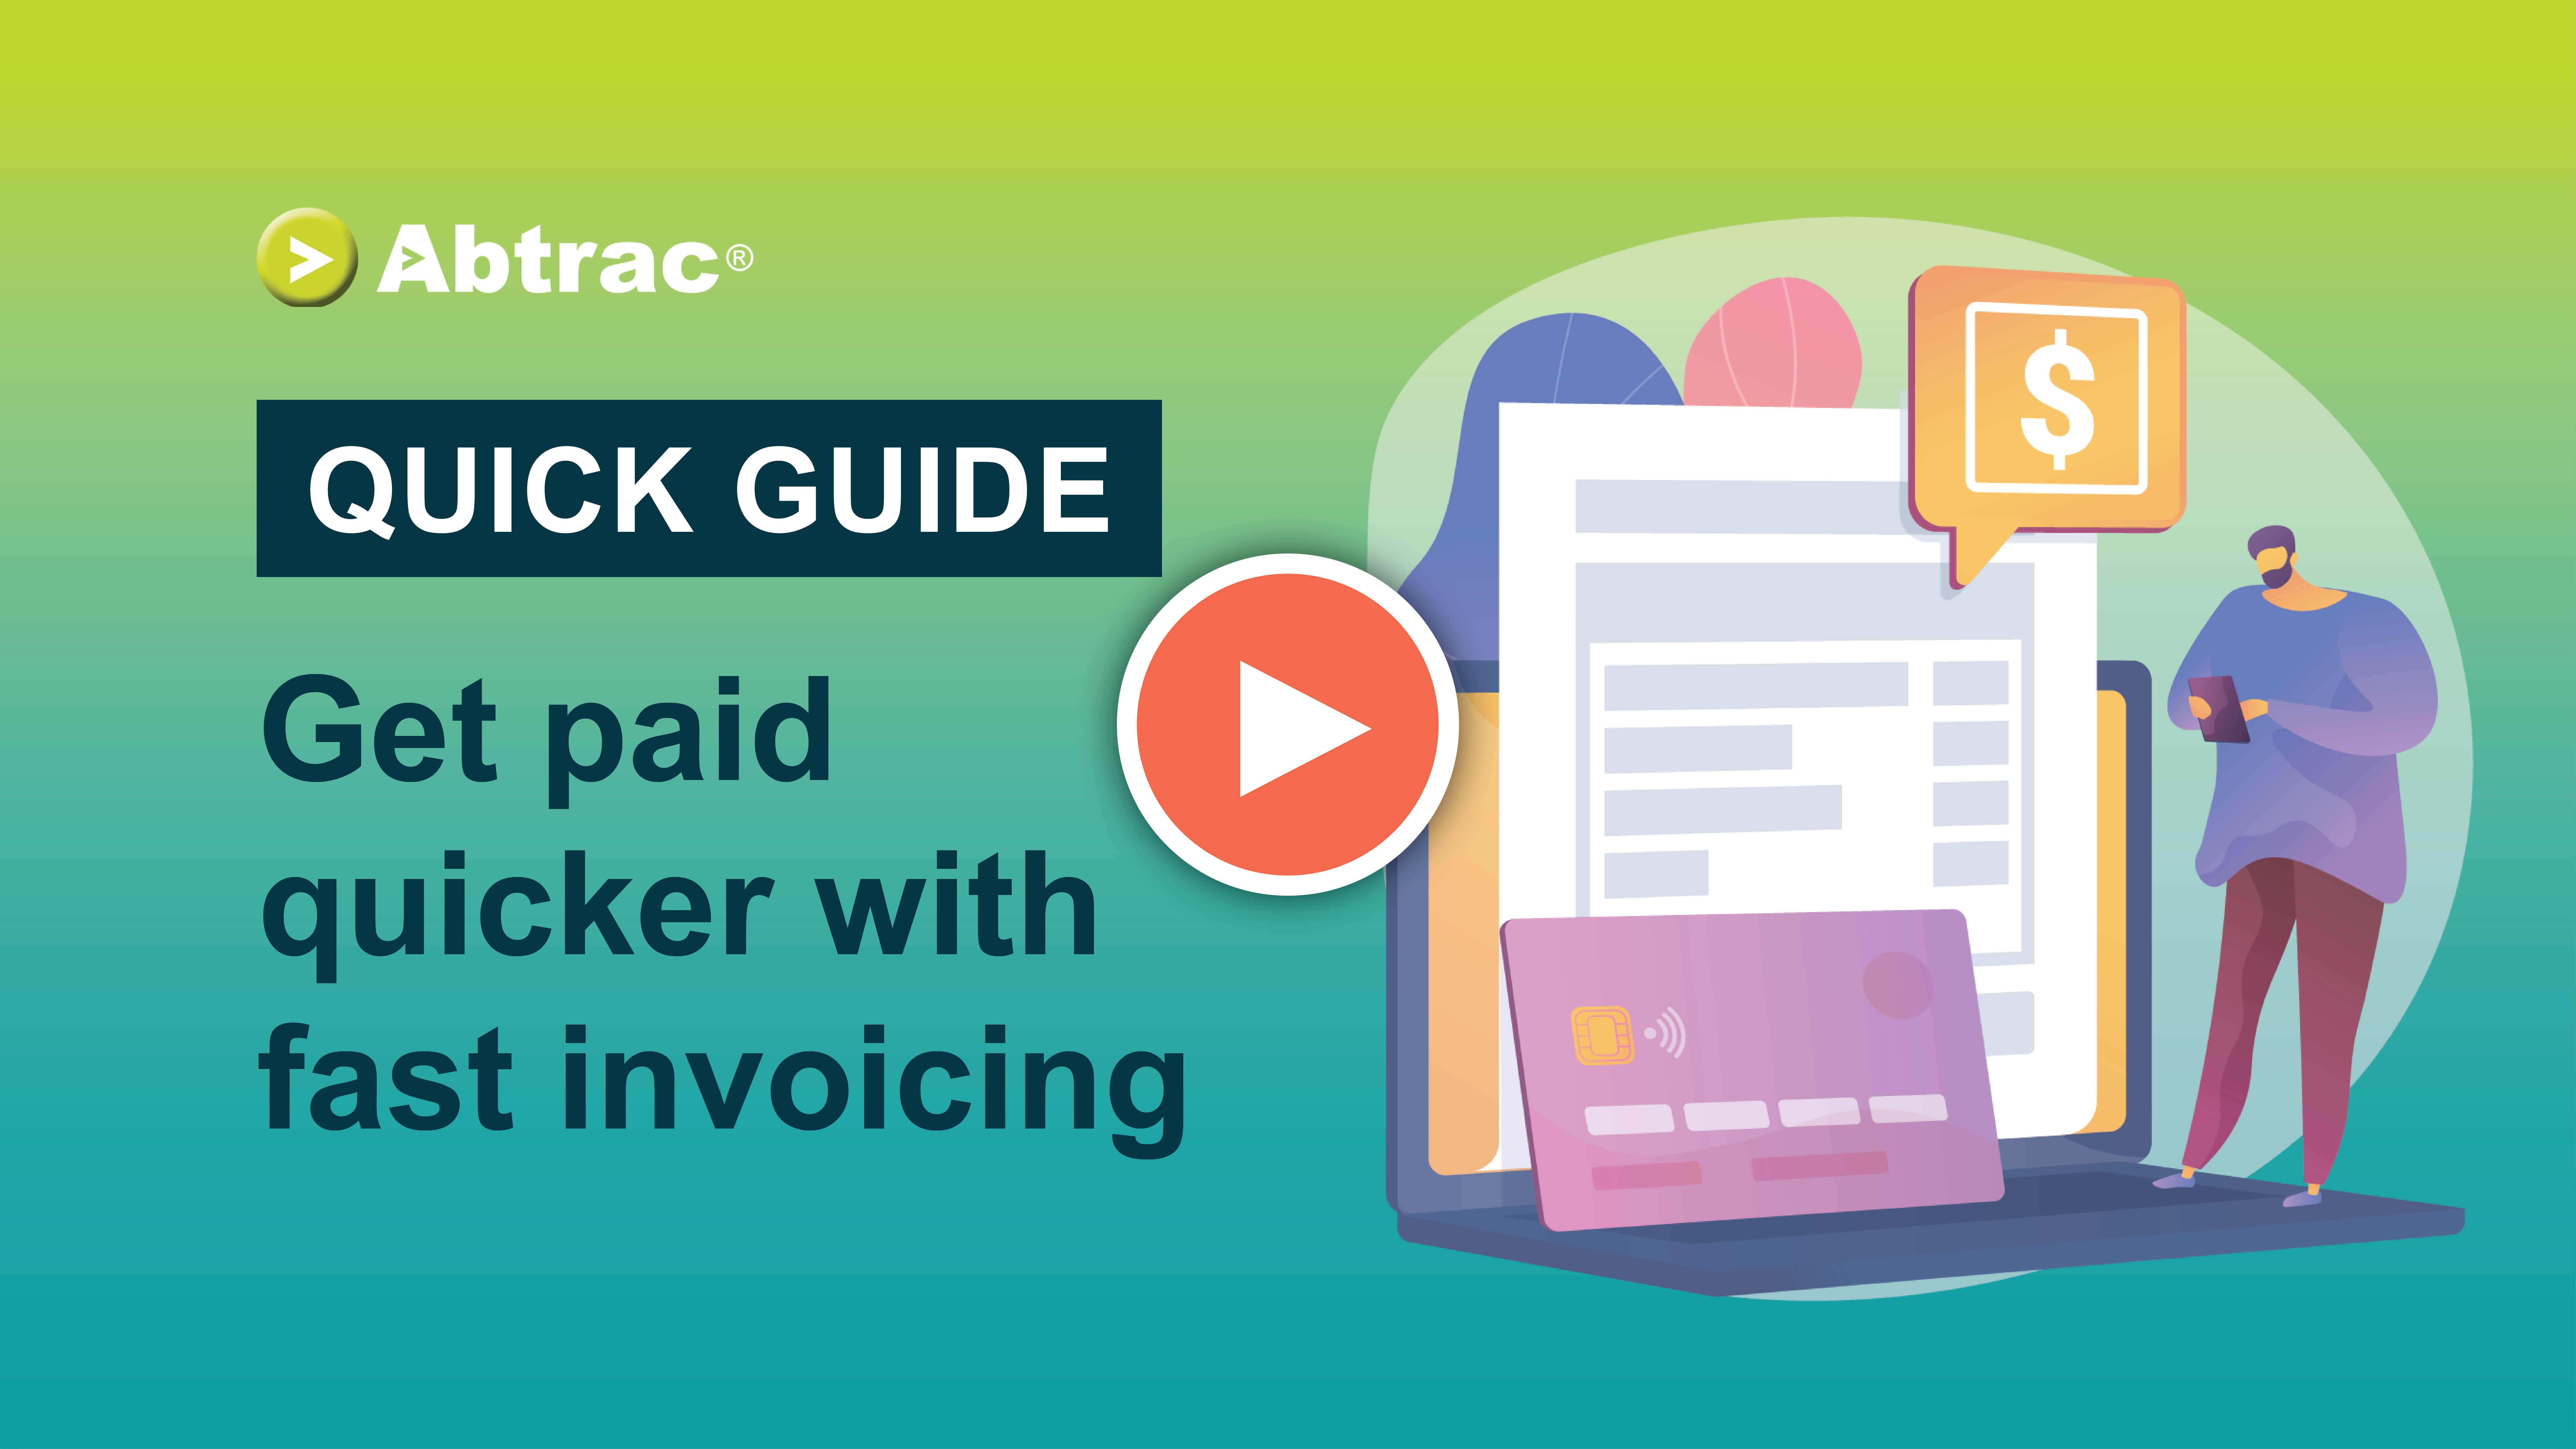 Fast invoicing is the key to getting paid better Video